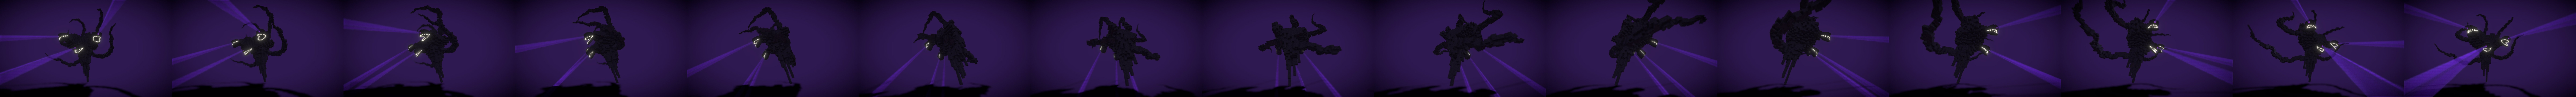 Repeating Wither Storm Phase 1 - 3D model by SBLExt- RWS (@SBLExt-RWS)  [e2acde1]